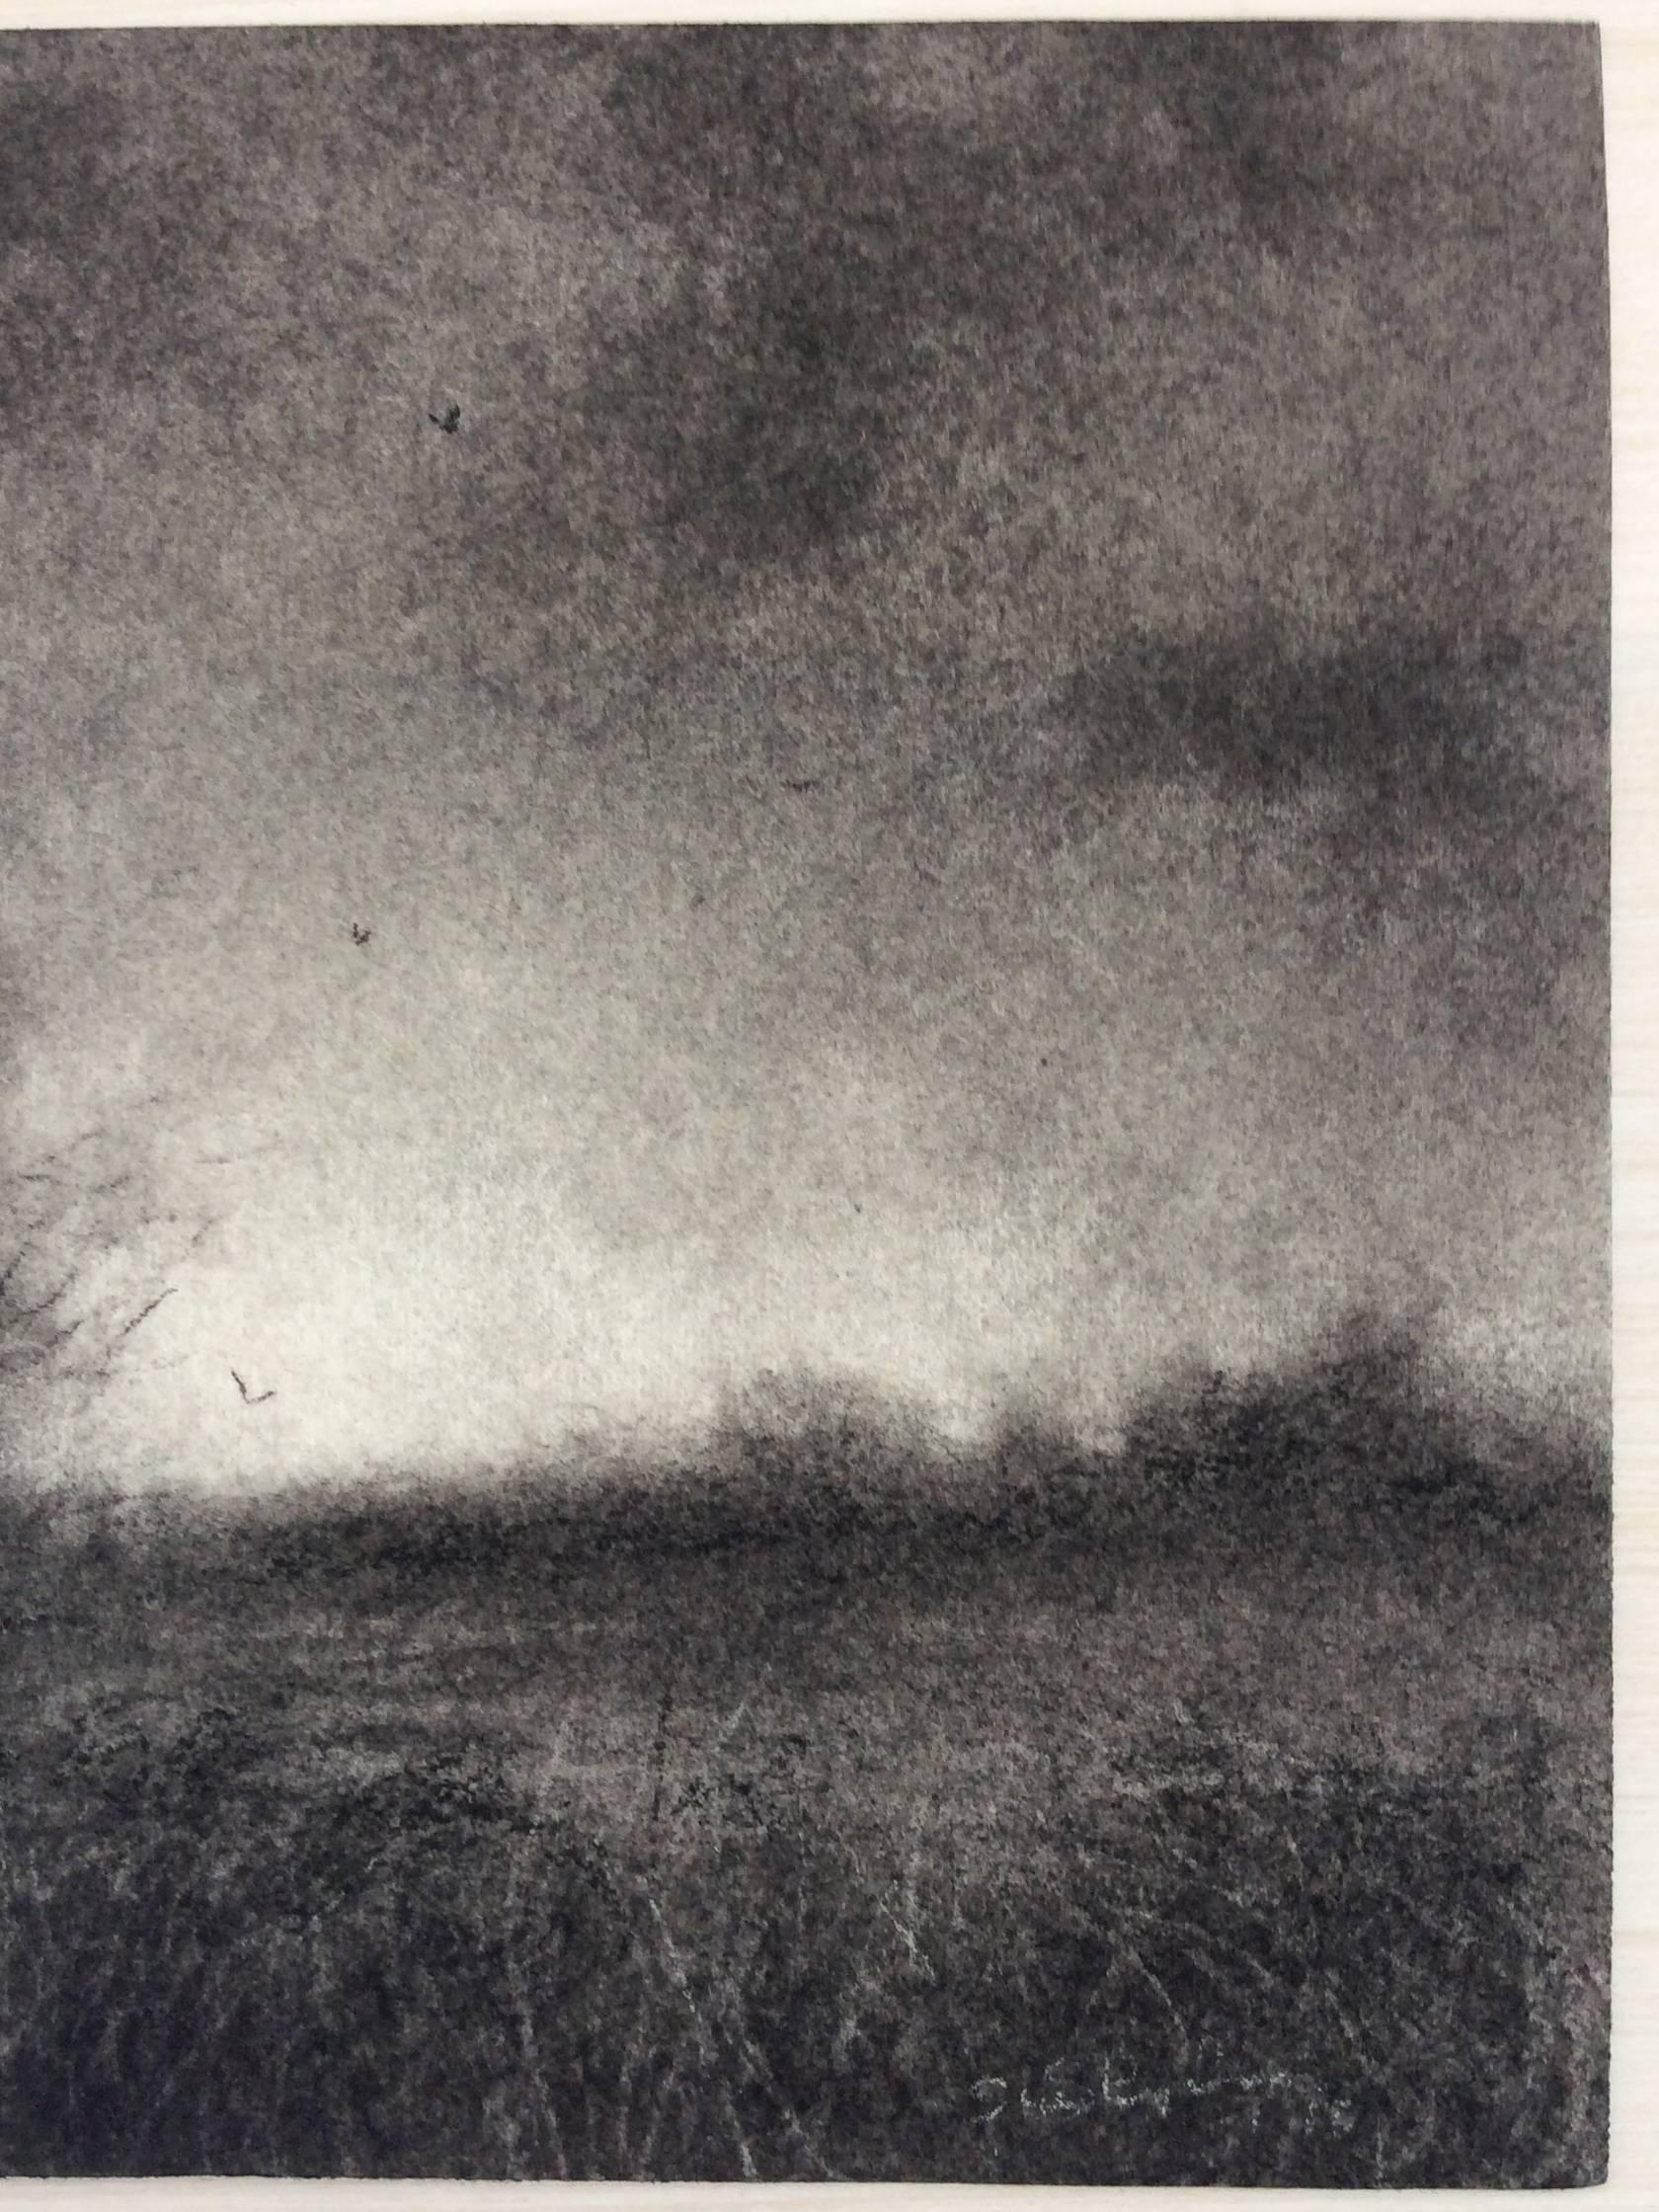 Edgeland XV (Miniature Realistic Landscape Drawing in Black Charcoal, Framed) by Sue Bryan

Charcoal and carbon pencil on Arches paper, signed lower right
4 x 4 inches unframed, 9.5 x 9.5 inches in Larson Juhl graphite finished wood moulding, 8 ply